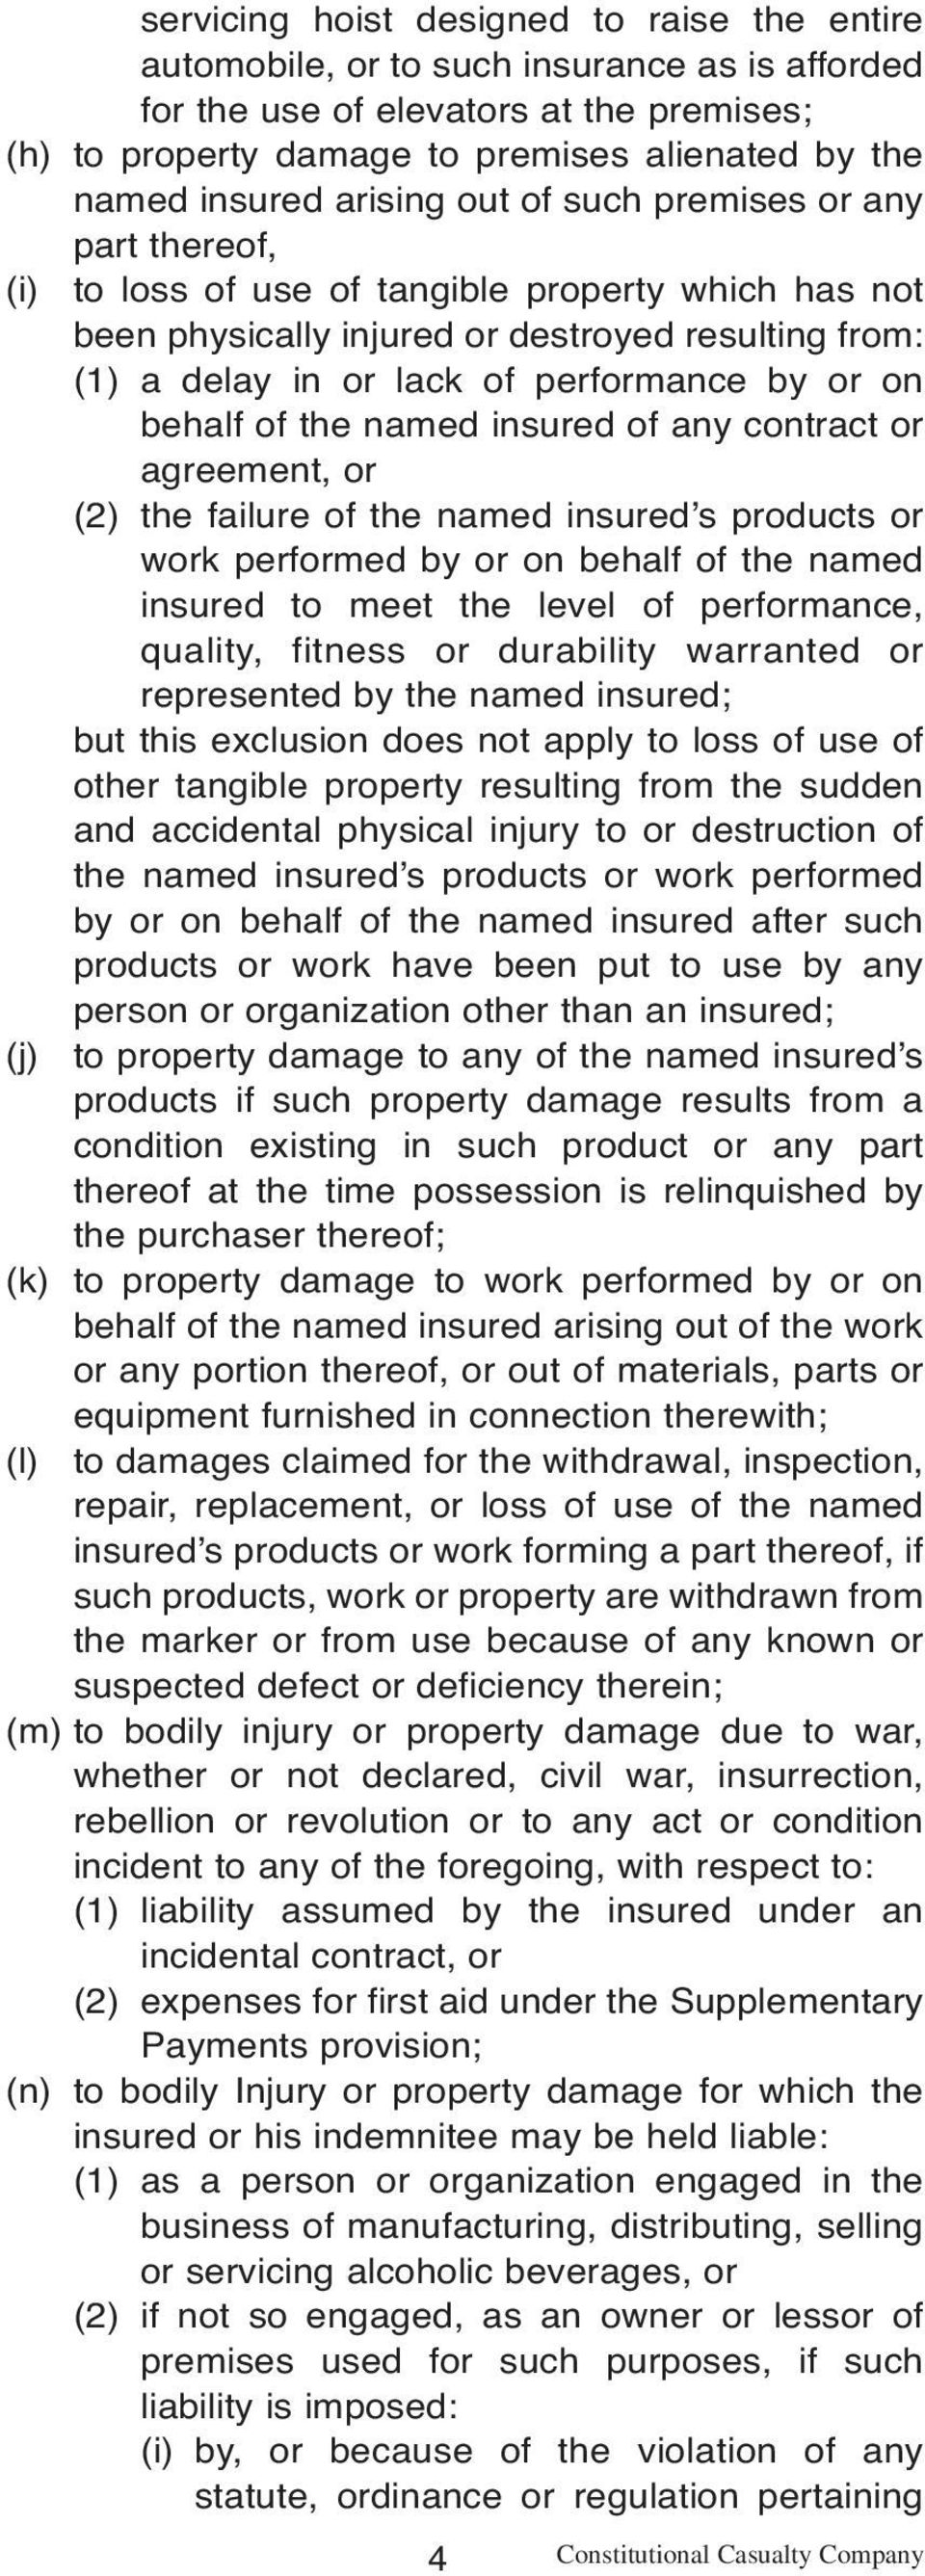 performance by or on behalf of the named insured of any contract or agreement, or (2) the failure of the named insured s products or work performed by or on behalf of the named insured to meet the